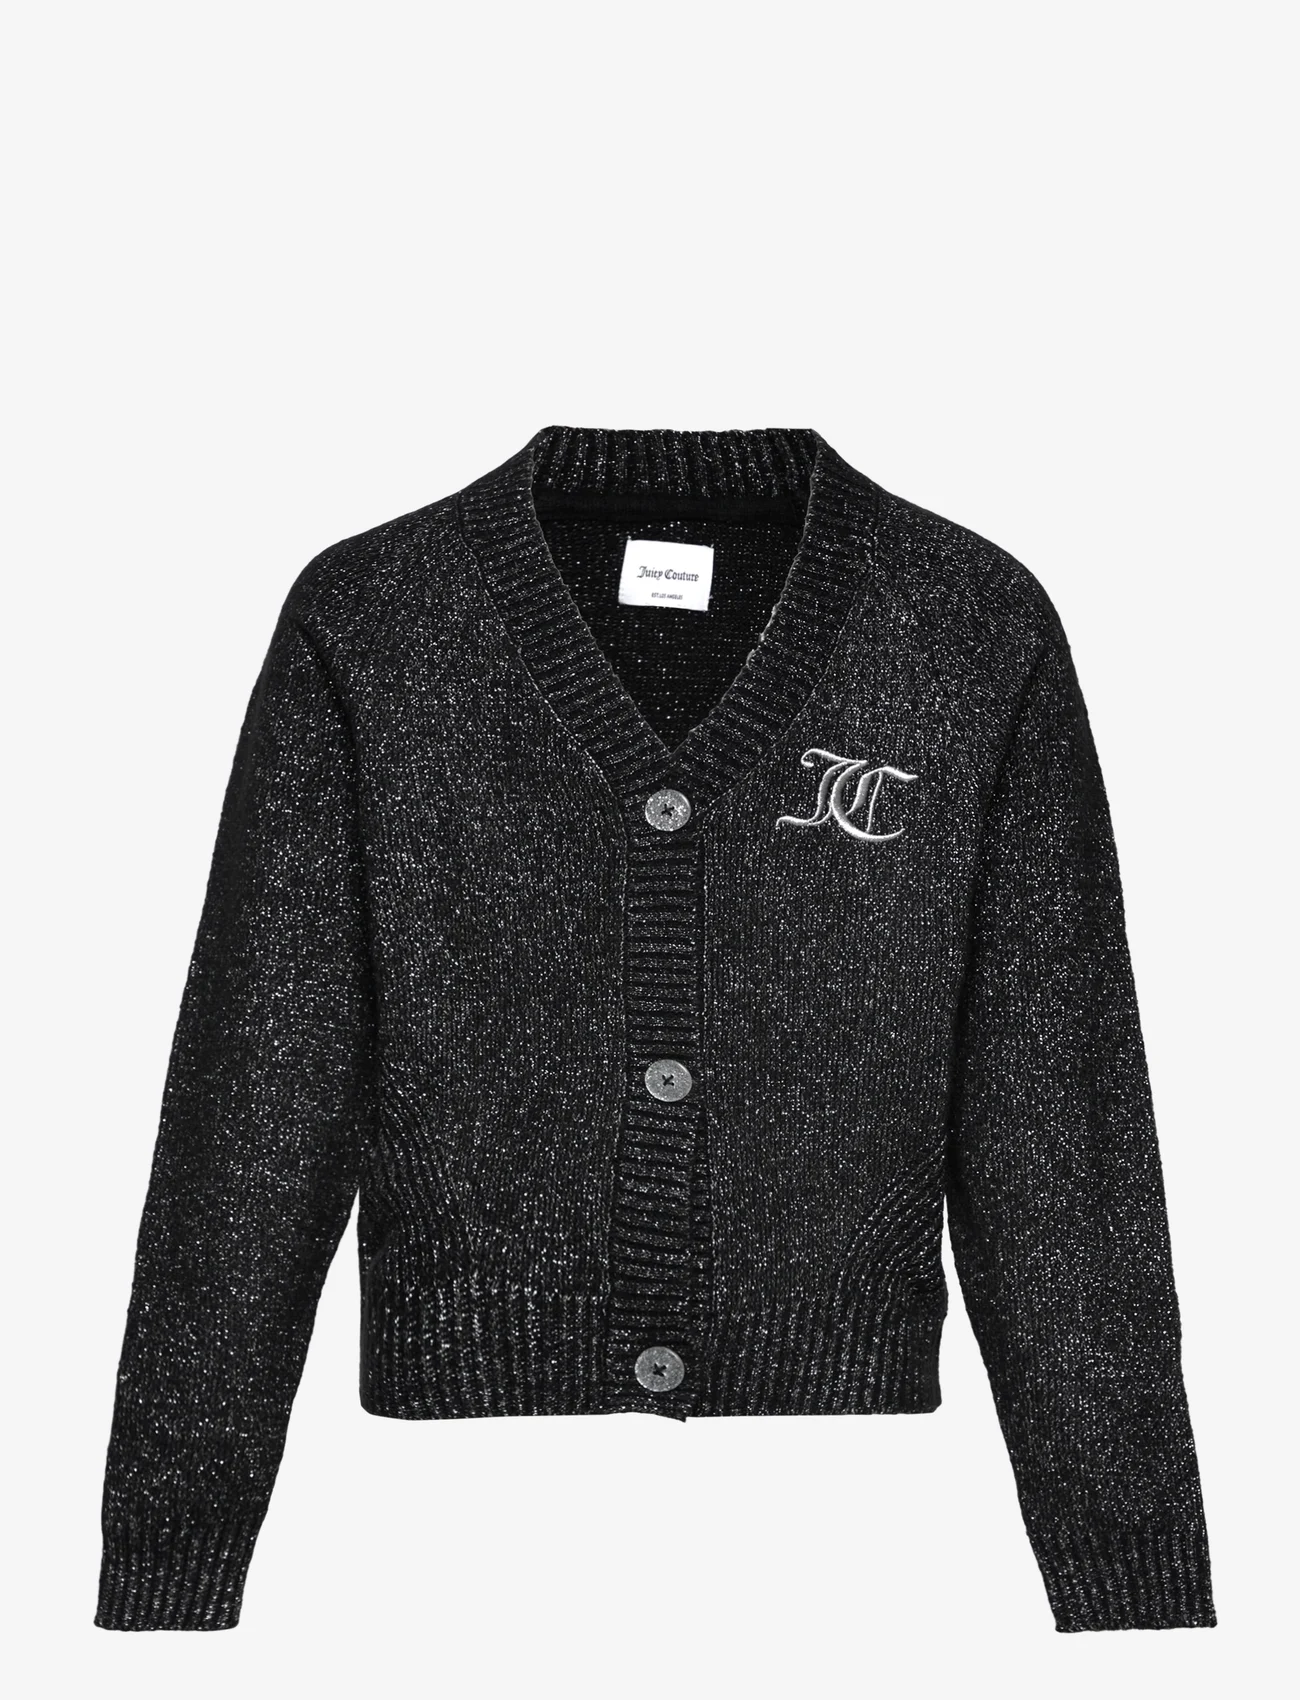 Juicy Couture - Fluffy Knit Metallic Cardigan - cardigans - black - 0